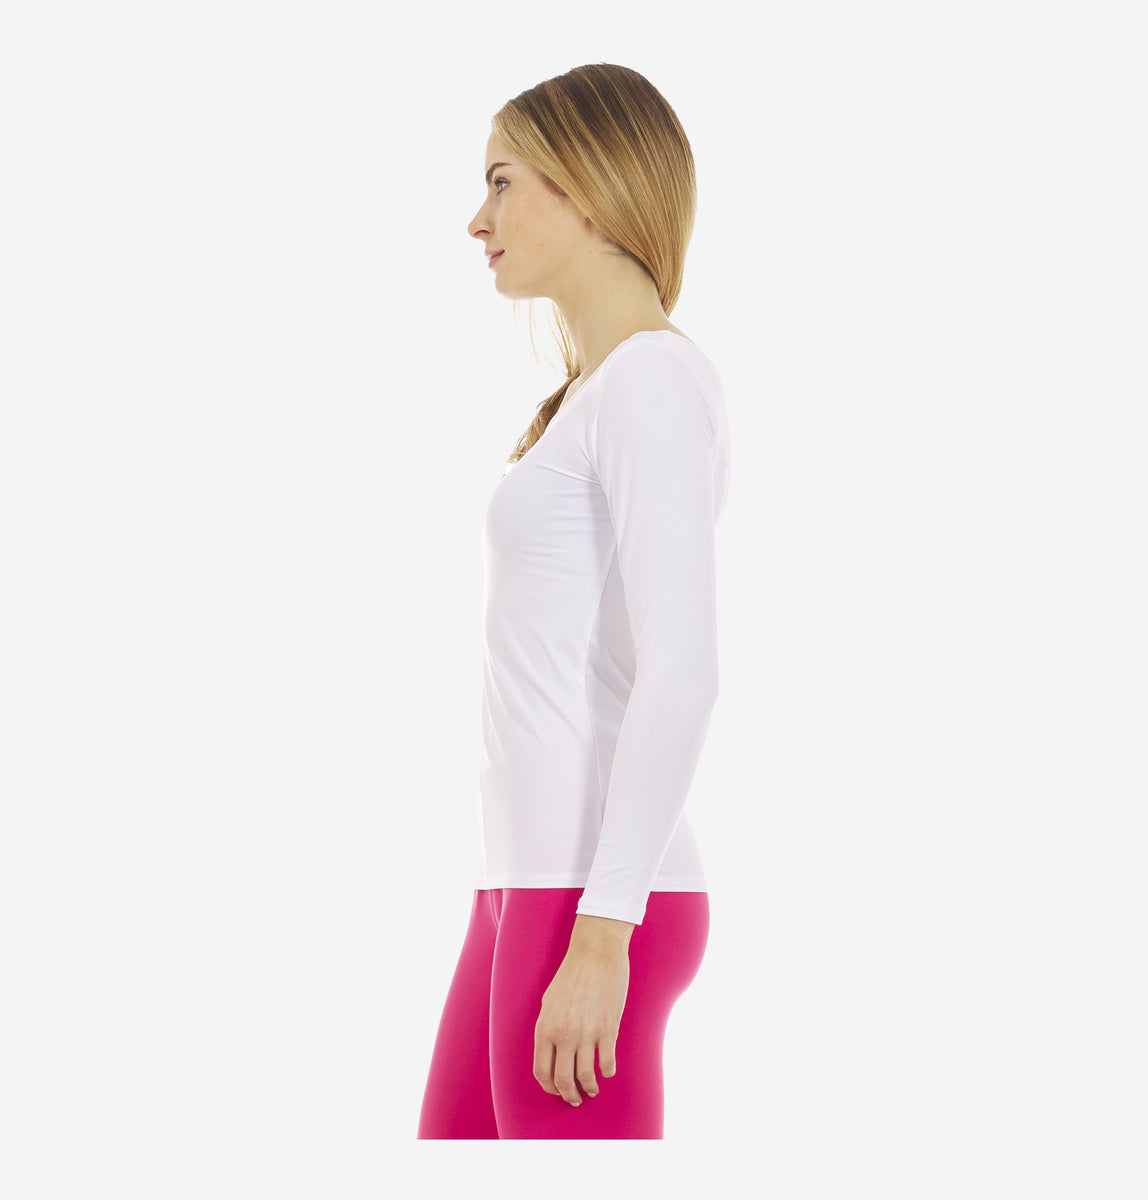 Women's Scoop Thermal Tops: Free Shipping (US) Returns & Exchanges